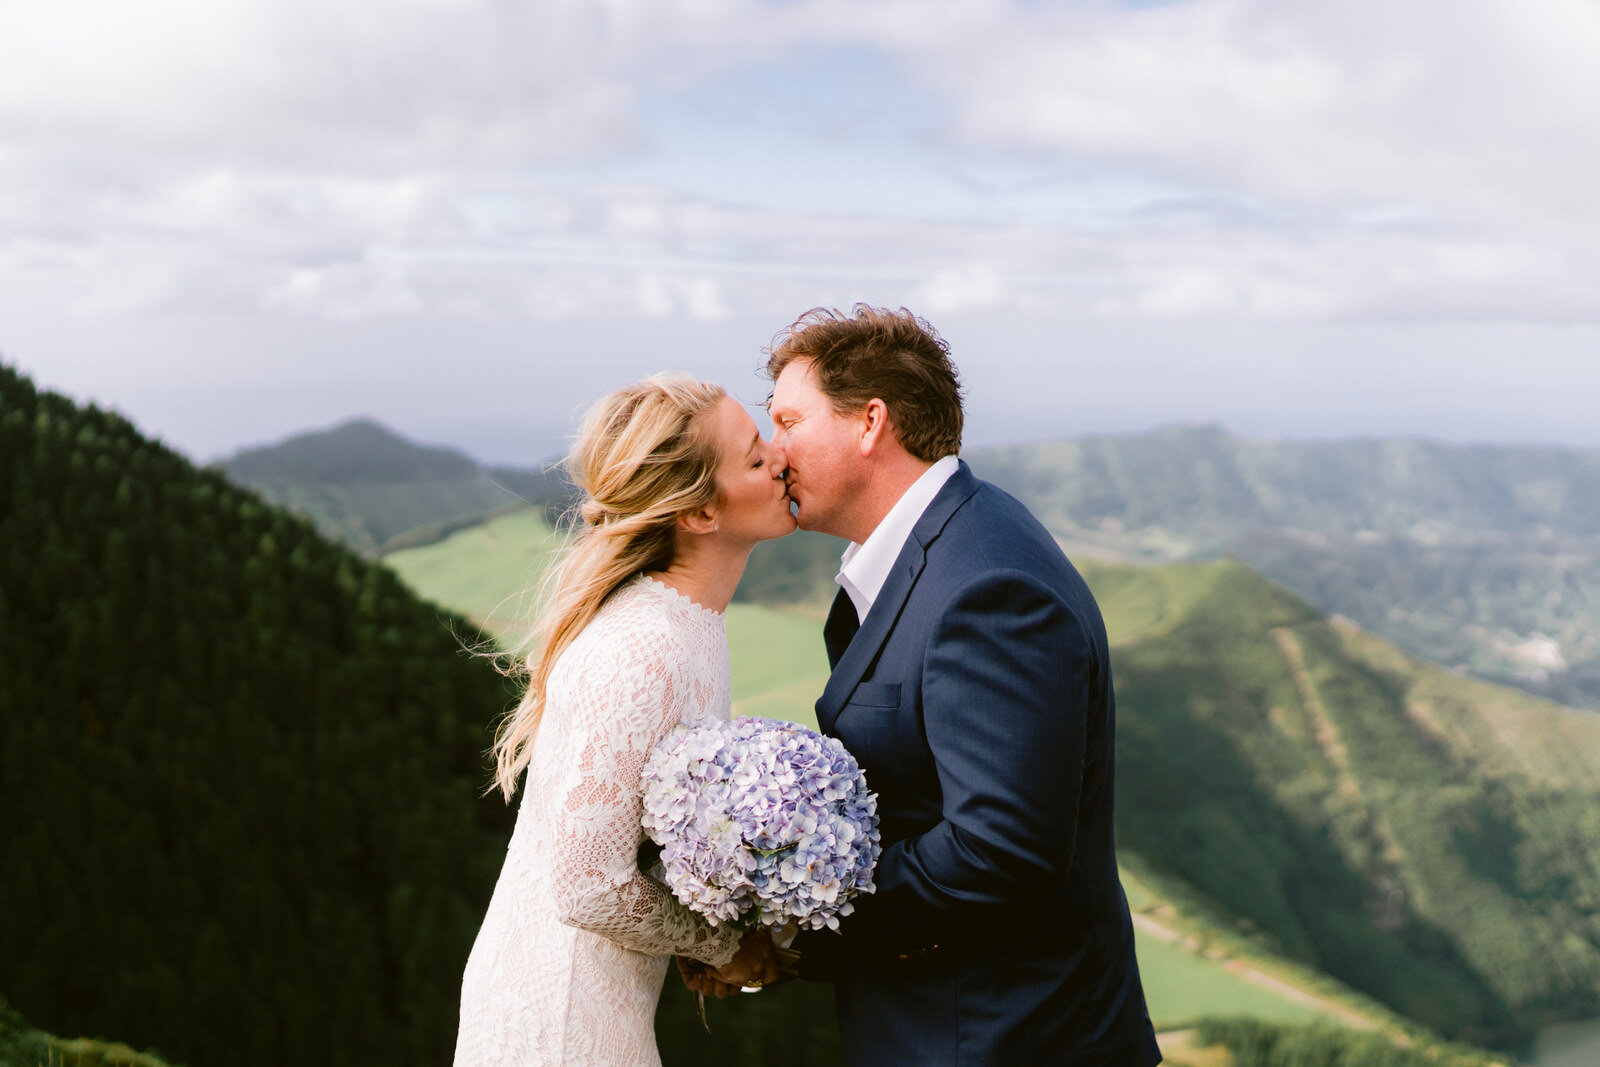 Elopement in the Azores. Cpuple getting married in Portugal. Elopement photography in Europe. Epic locations to elope in the world. Sao Miquel island Azores wedding (36).jpg